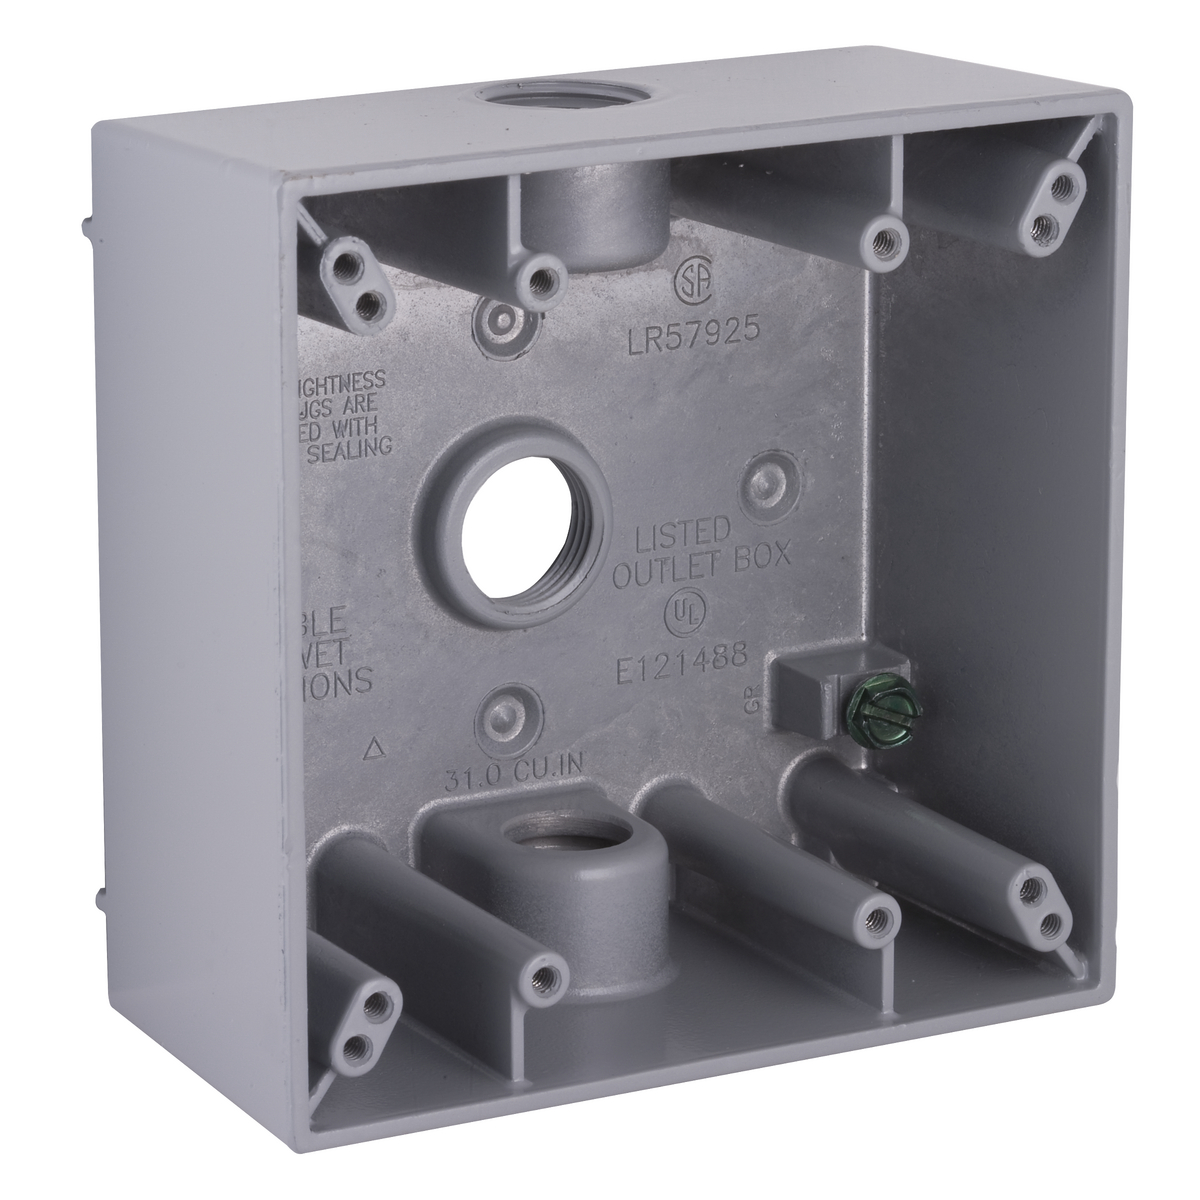 RAC 5333-0 2G WP BOX (3) 1/2 IN. OUTLETS - GRAY